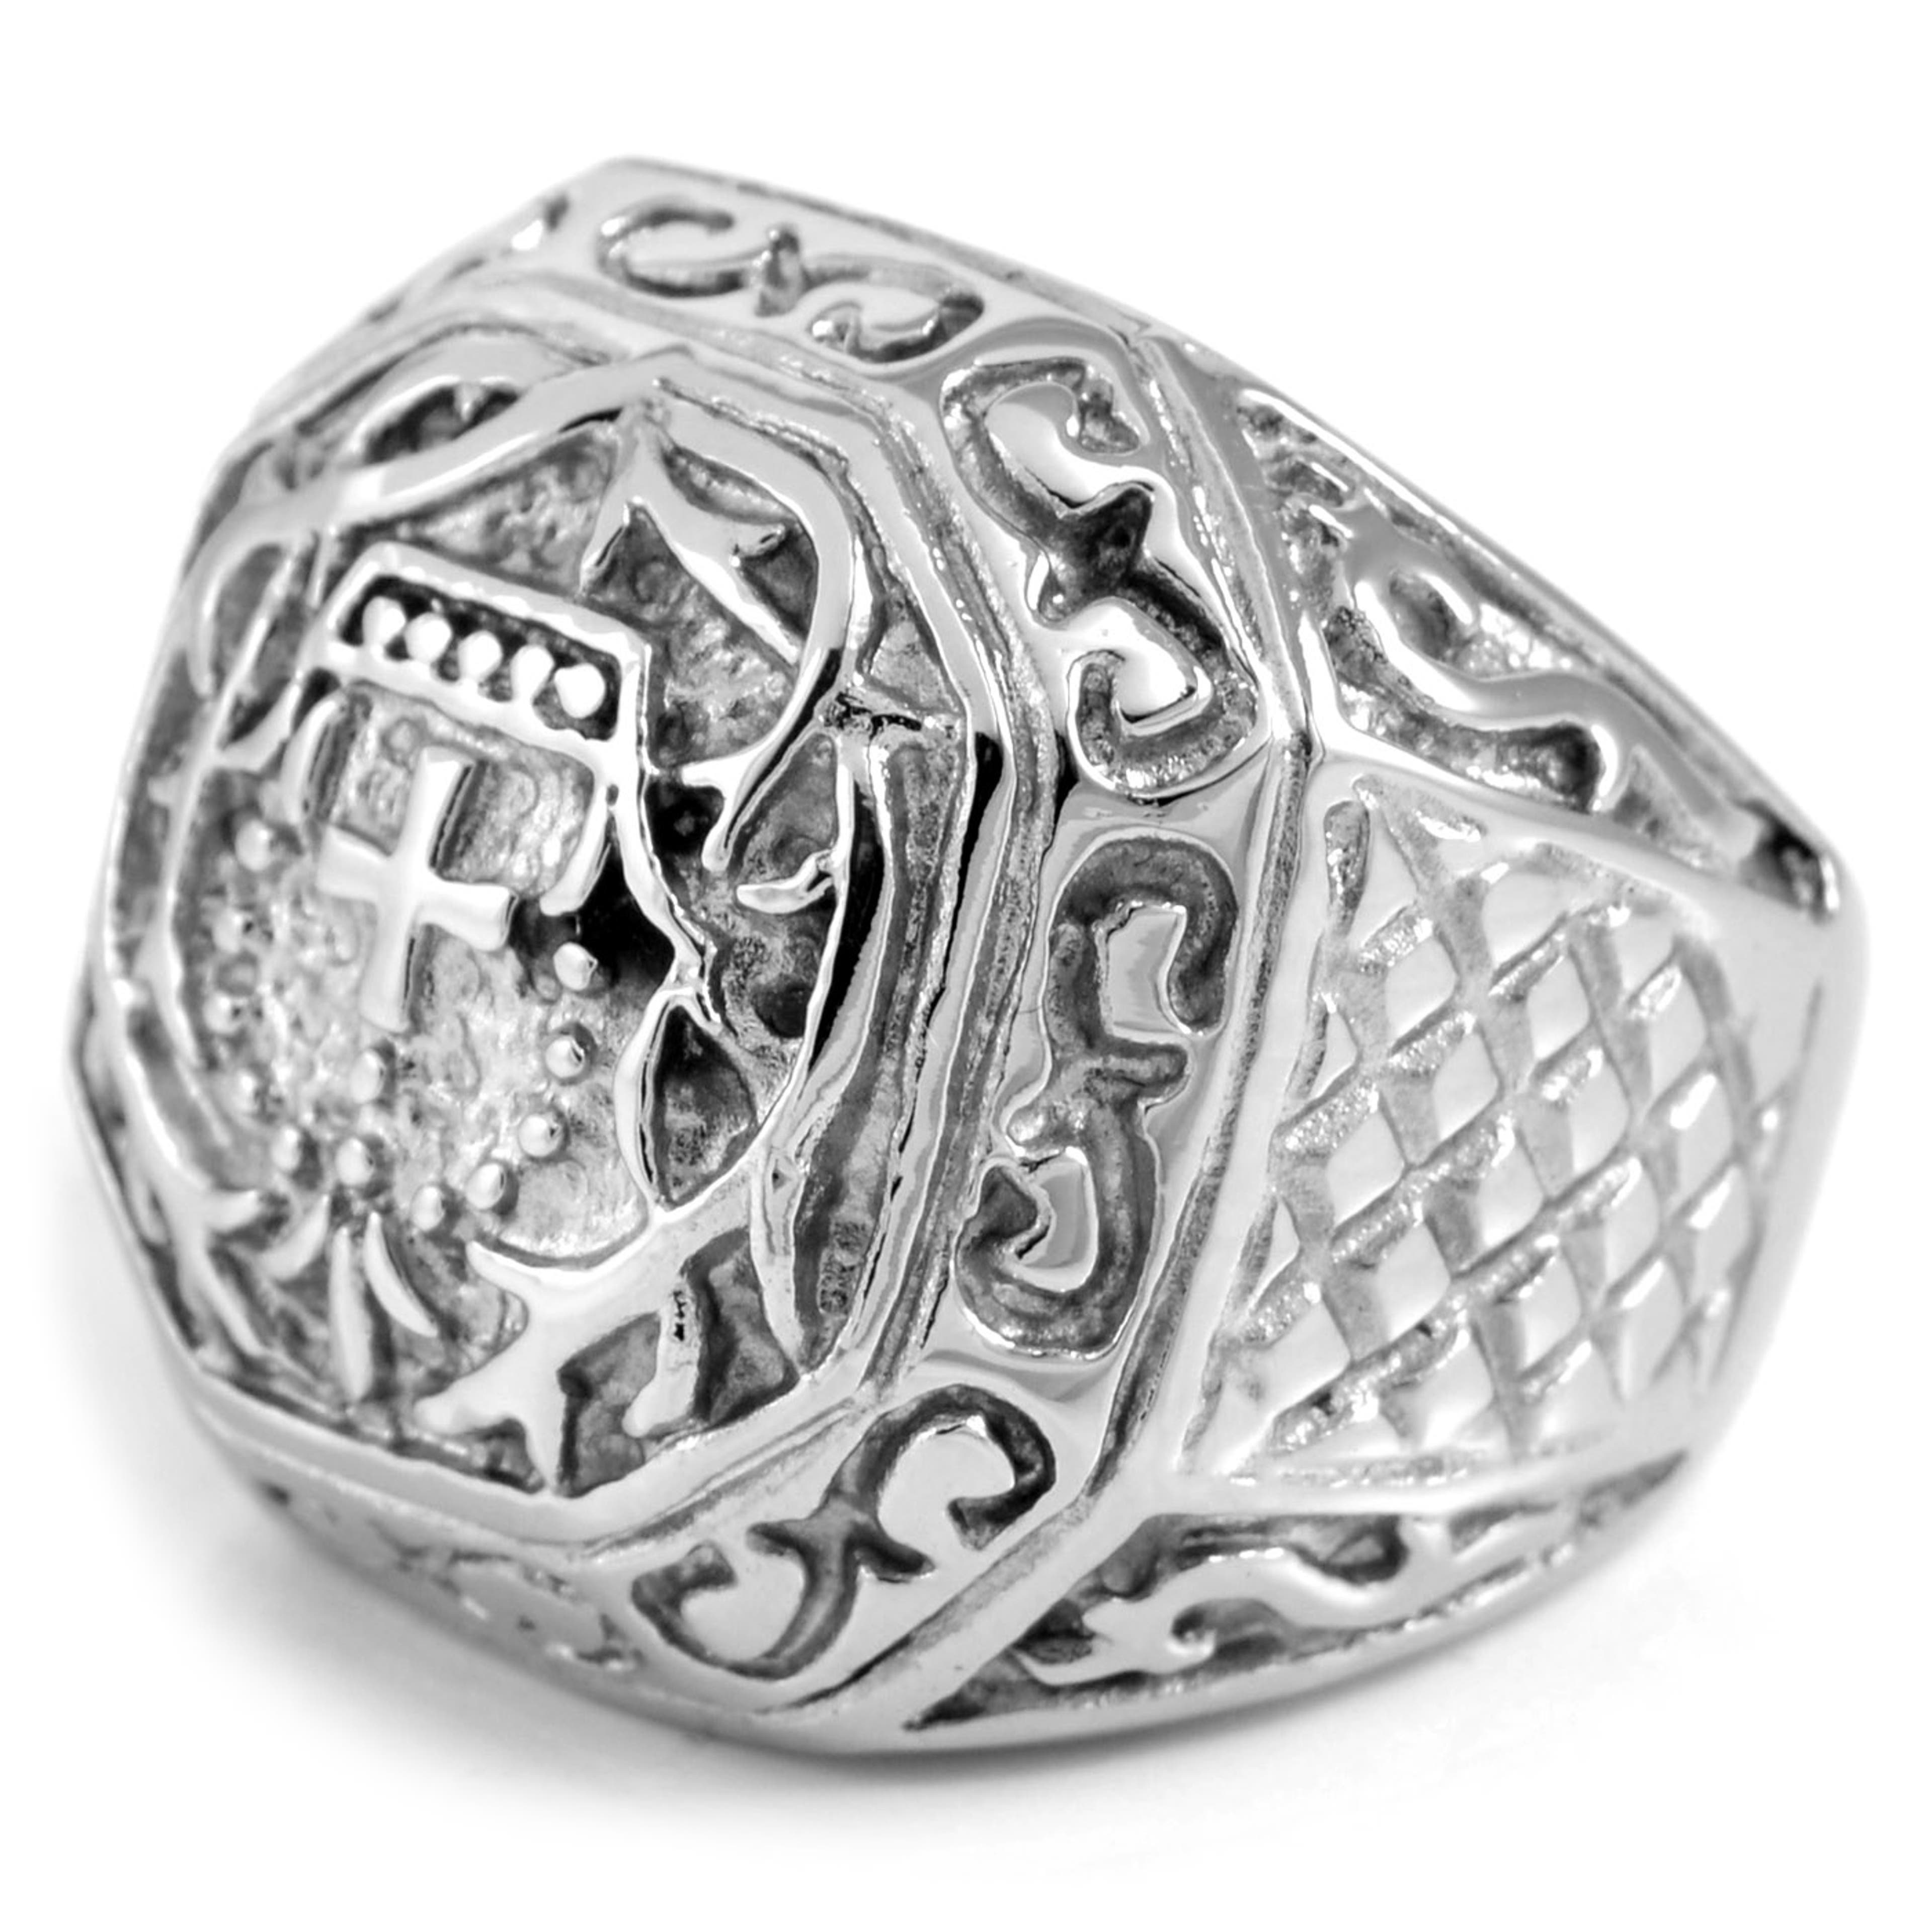 Silver-Tone Stainless Steel Roman Cross Ring